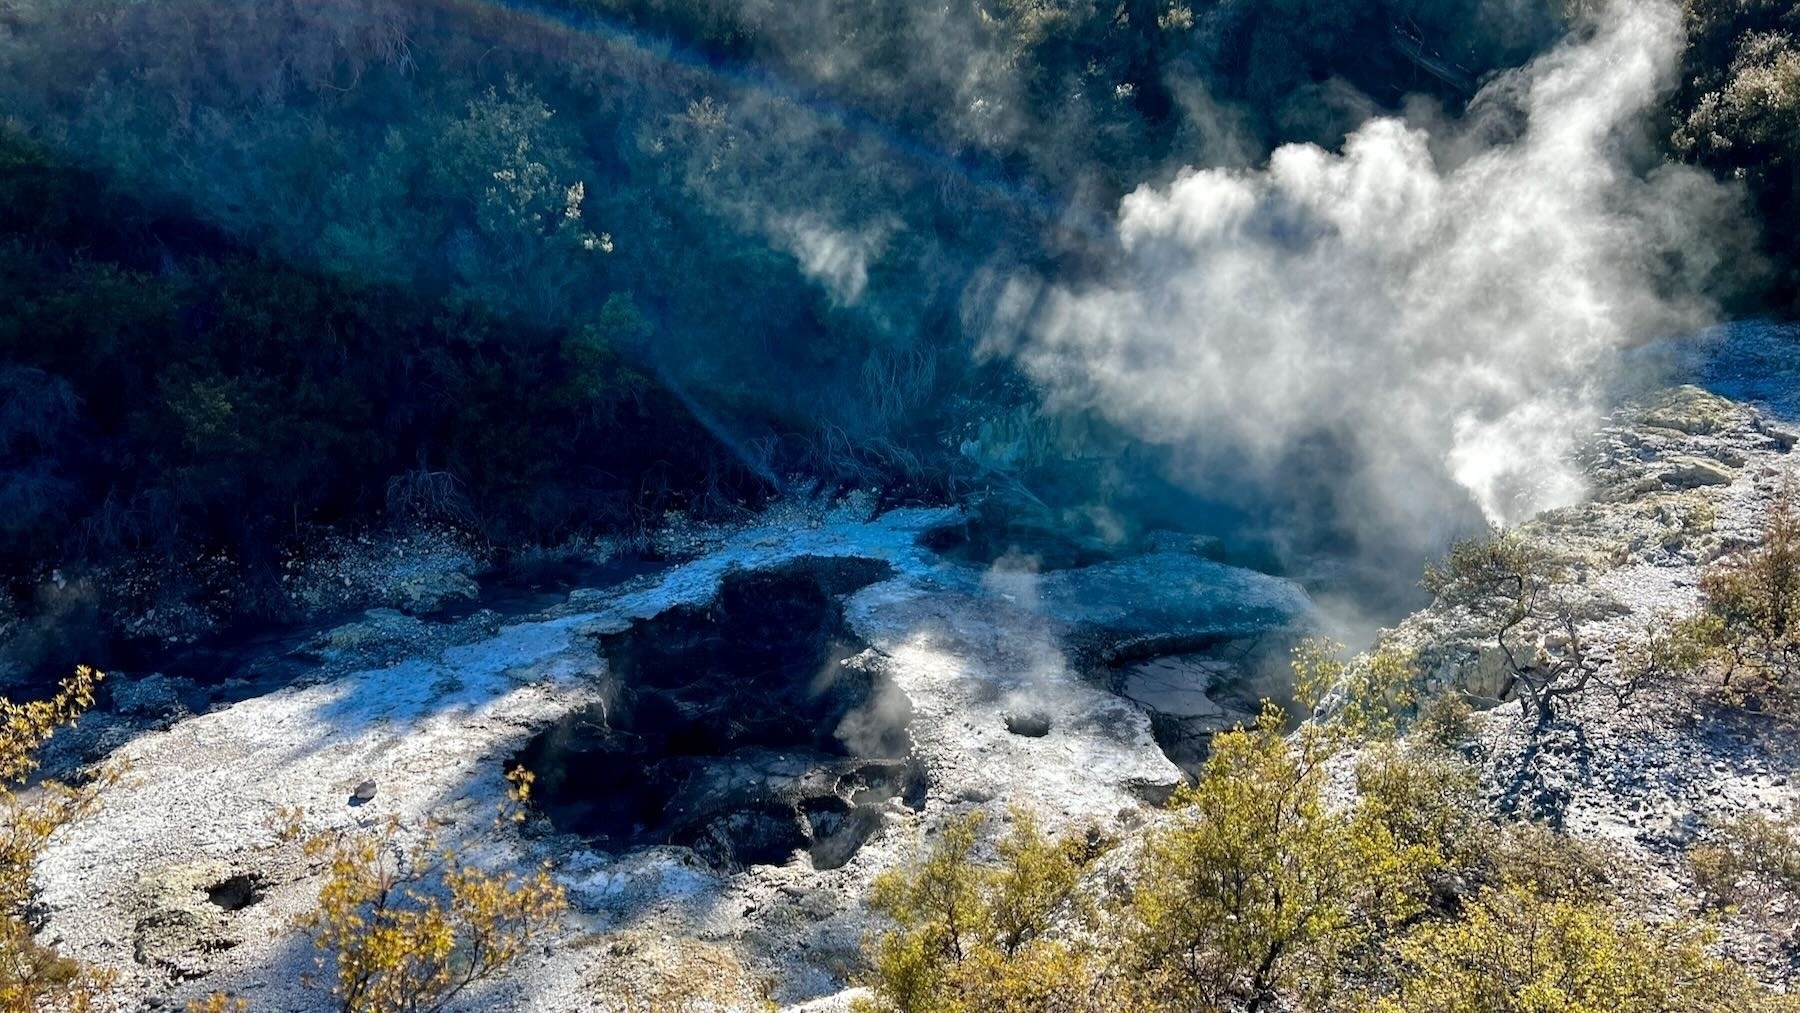 Small pool of mud surrounded by white rock and scrubby bushes, with steam lit by shafts of sun light. 